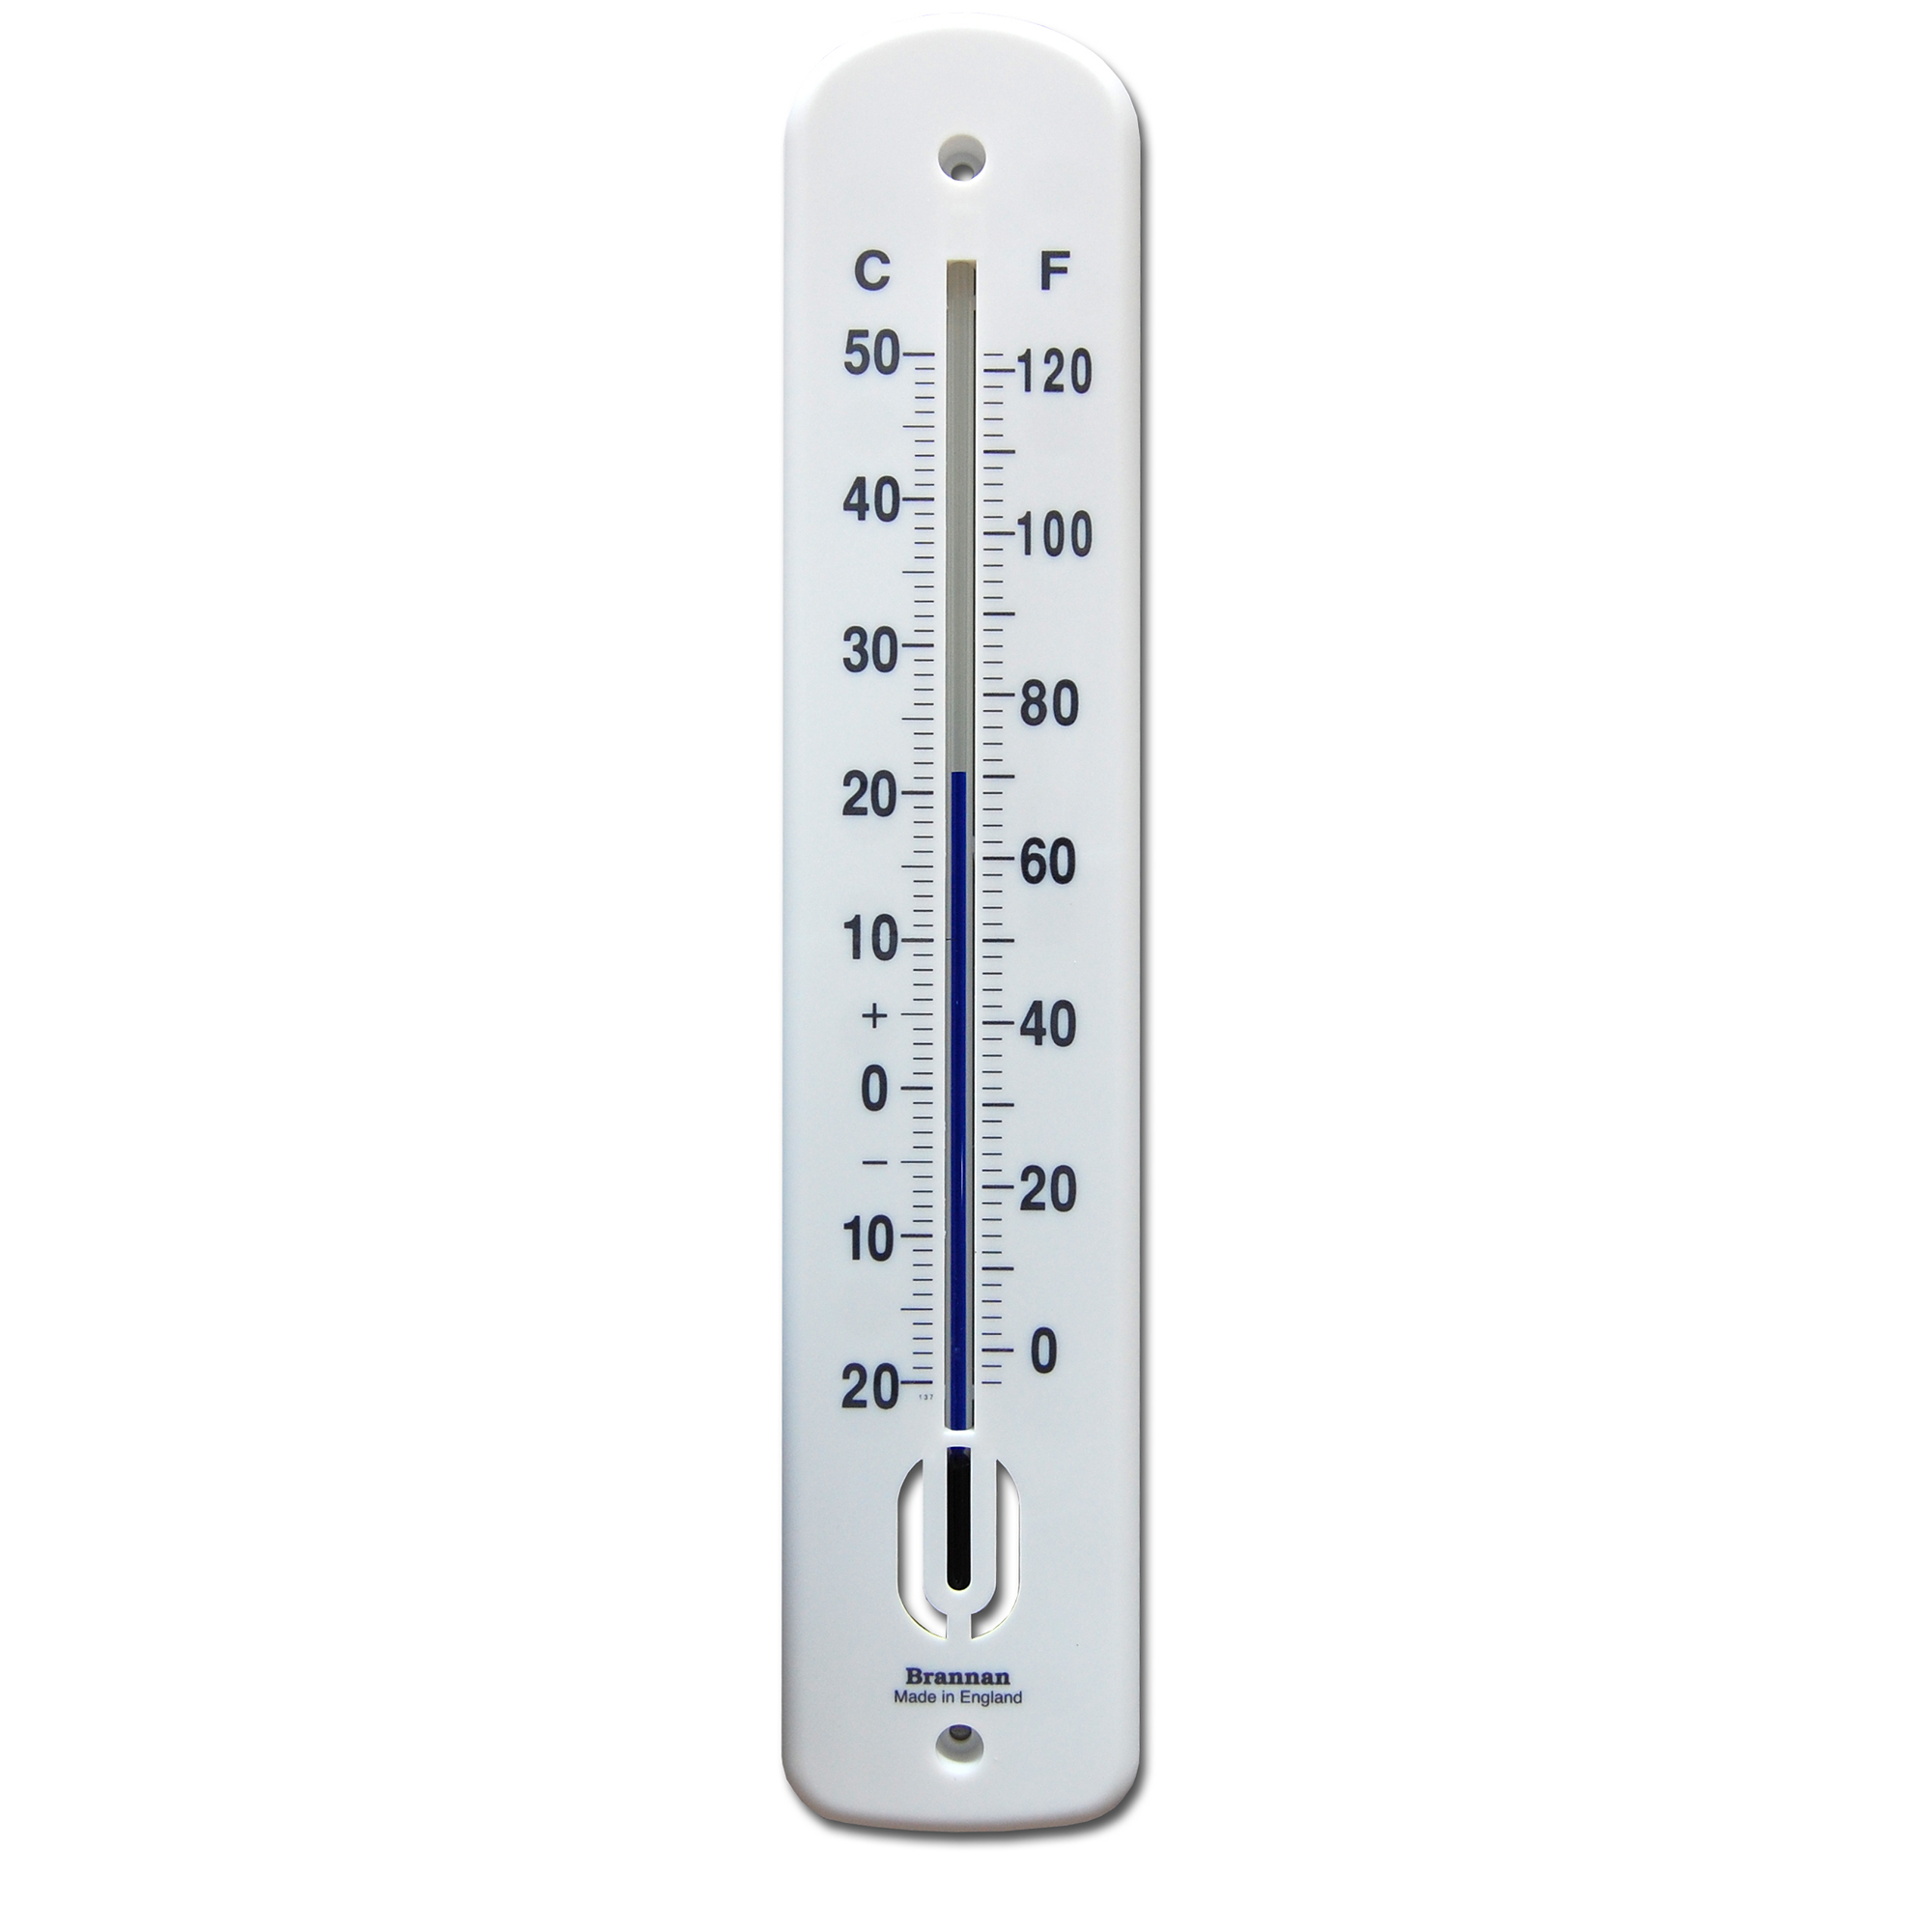 e8r05779-giant-thermometer-findel-international